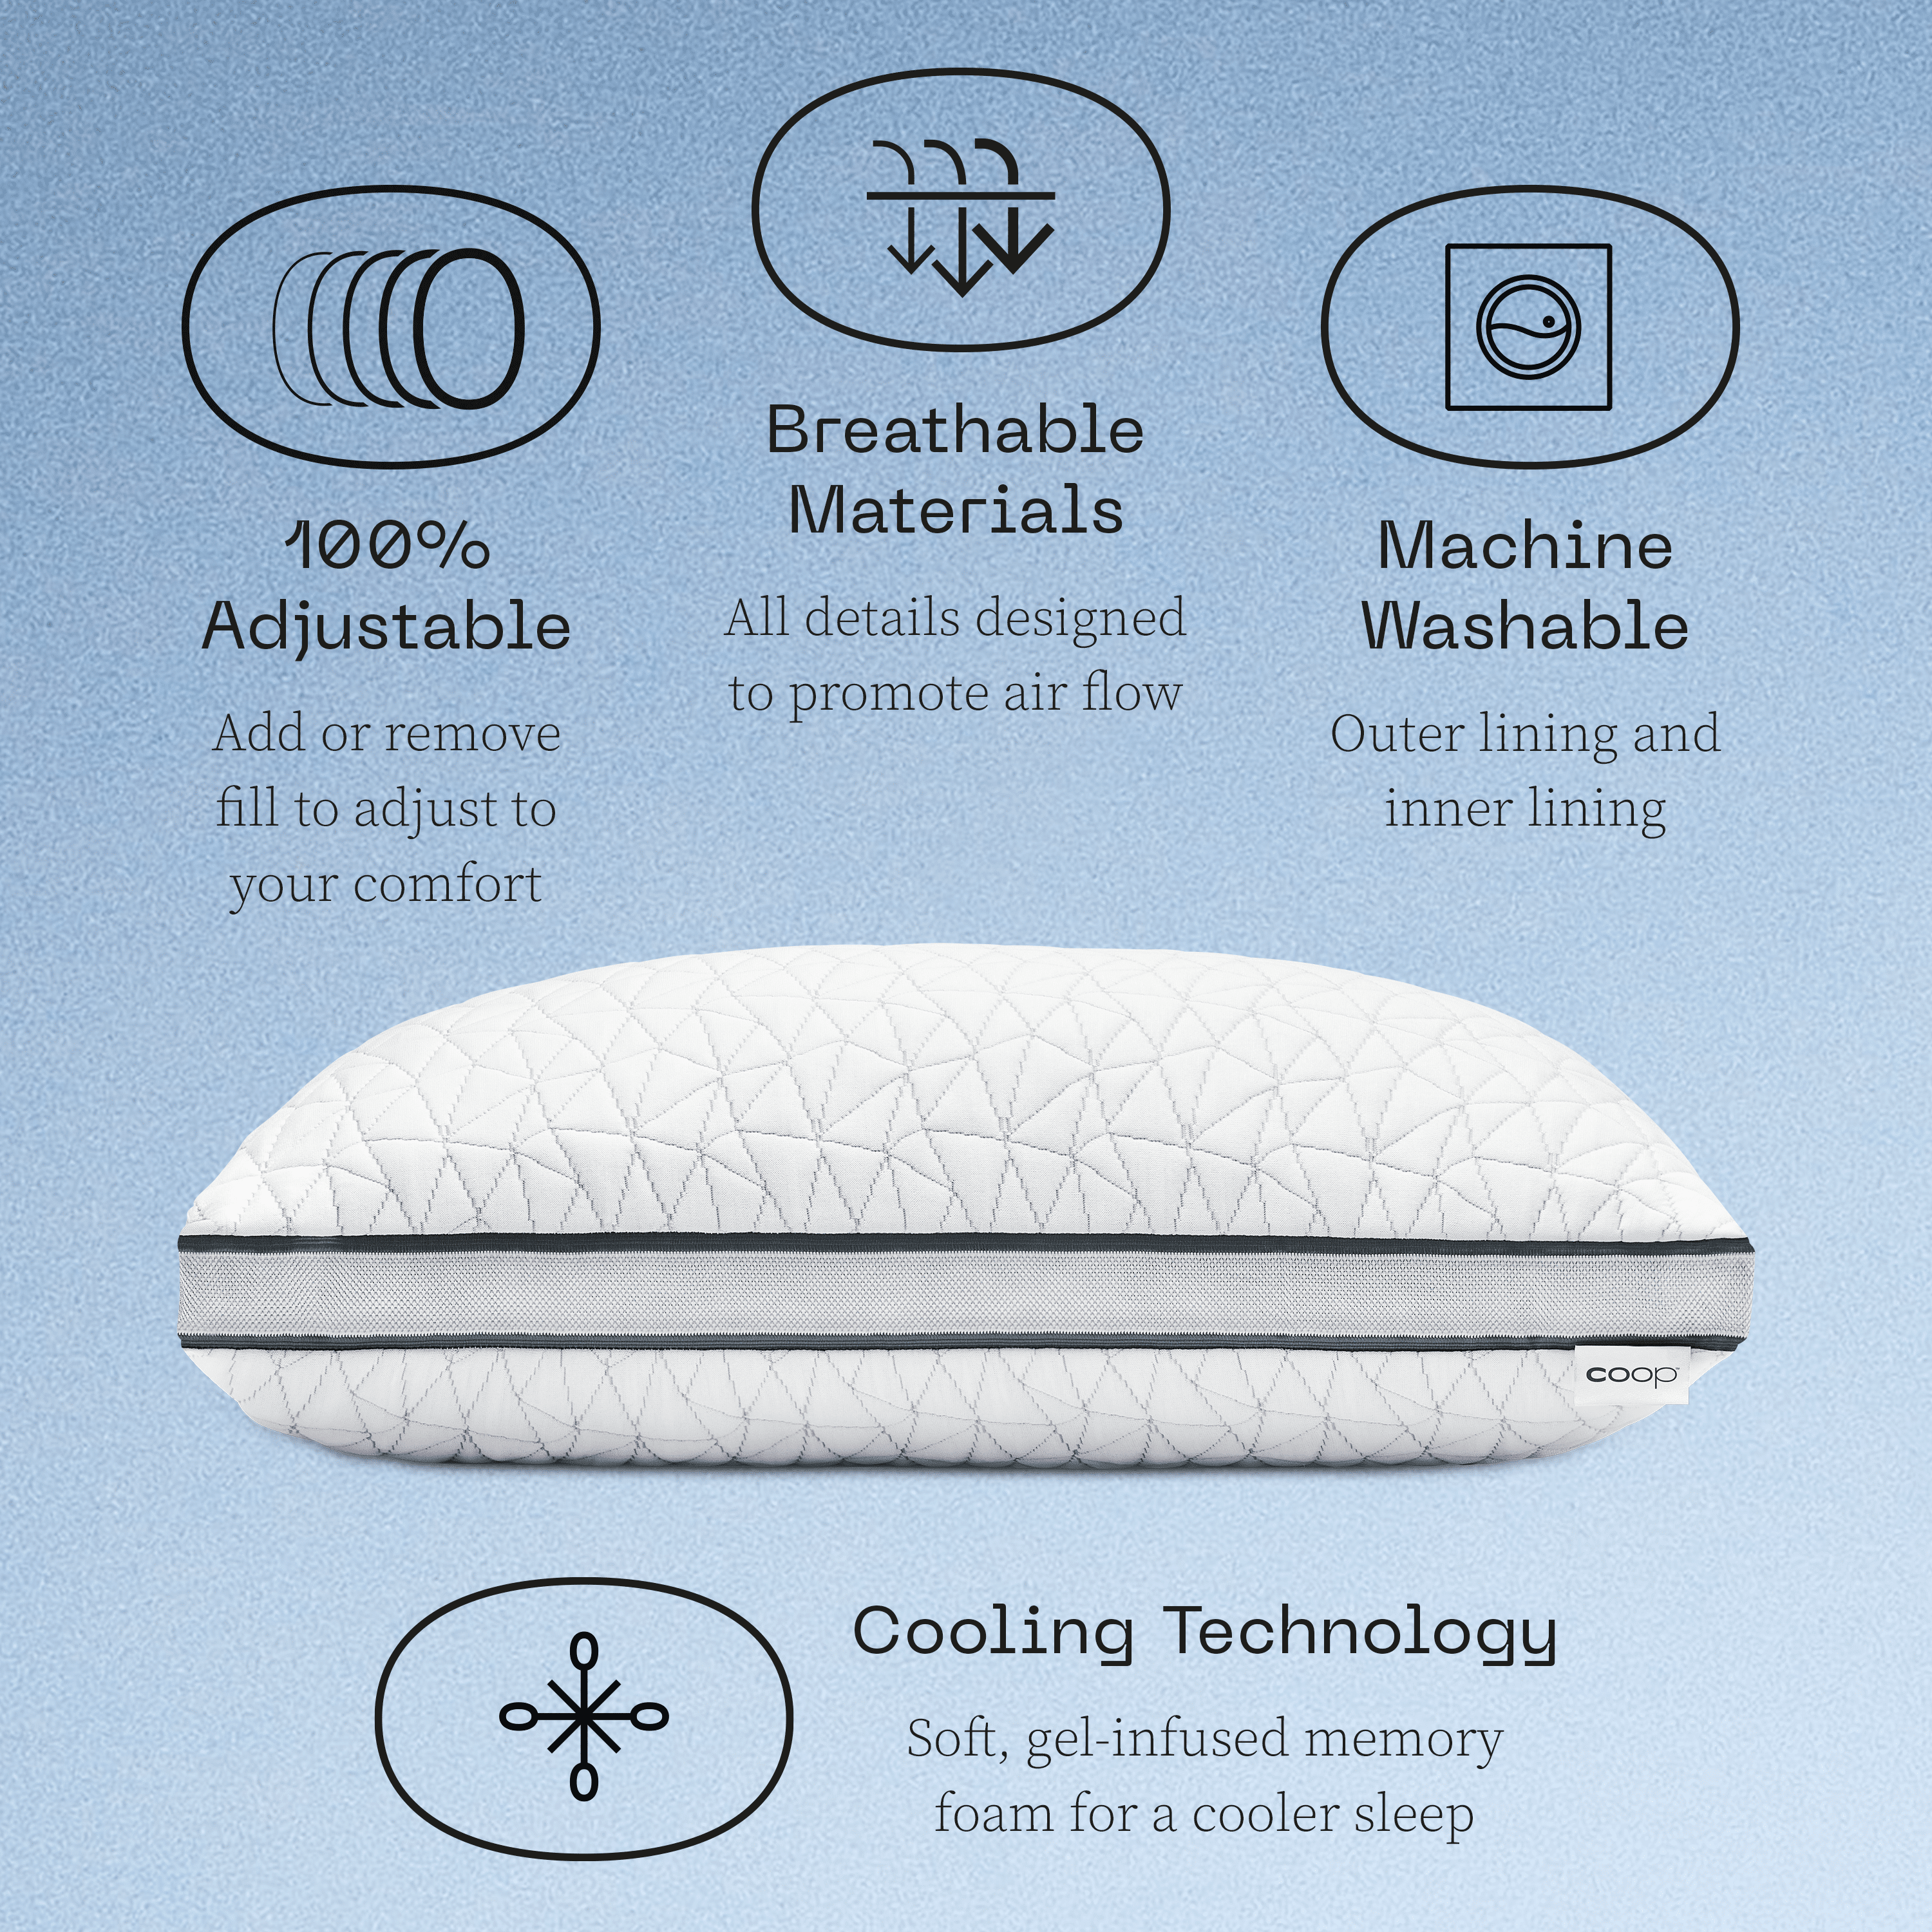 Coop Home Goods Eden Cool+ Pillow, Queen Size Plus Shaped Memory Foam  Pillows with Cooling Gel, Back, Stomach or Side Sleeper Pillow, Adjustable  Neck Support for Sleeping, CertiPUR-US/GREENGUARD Gold